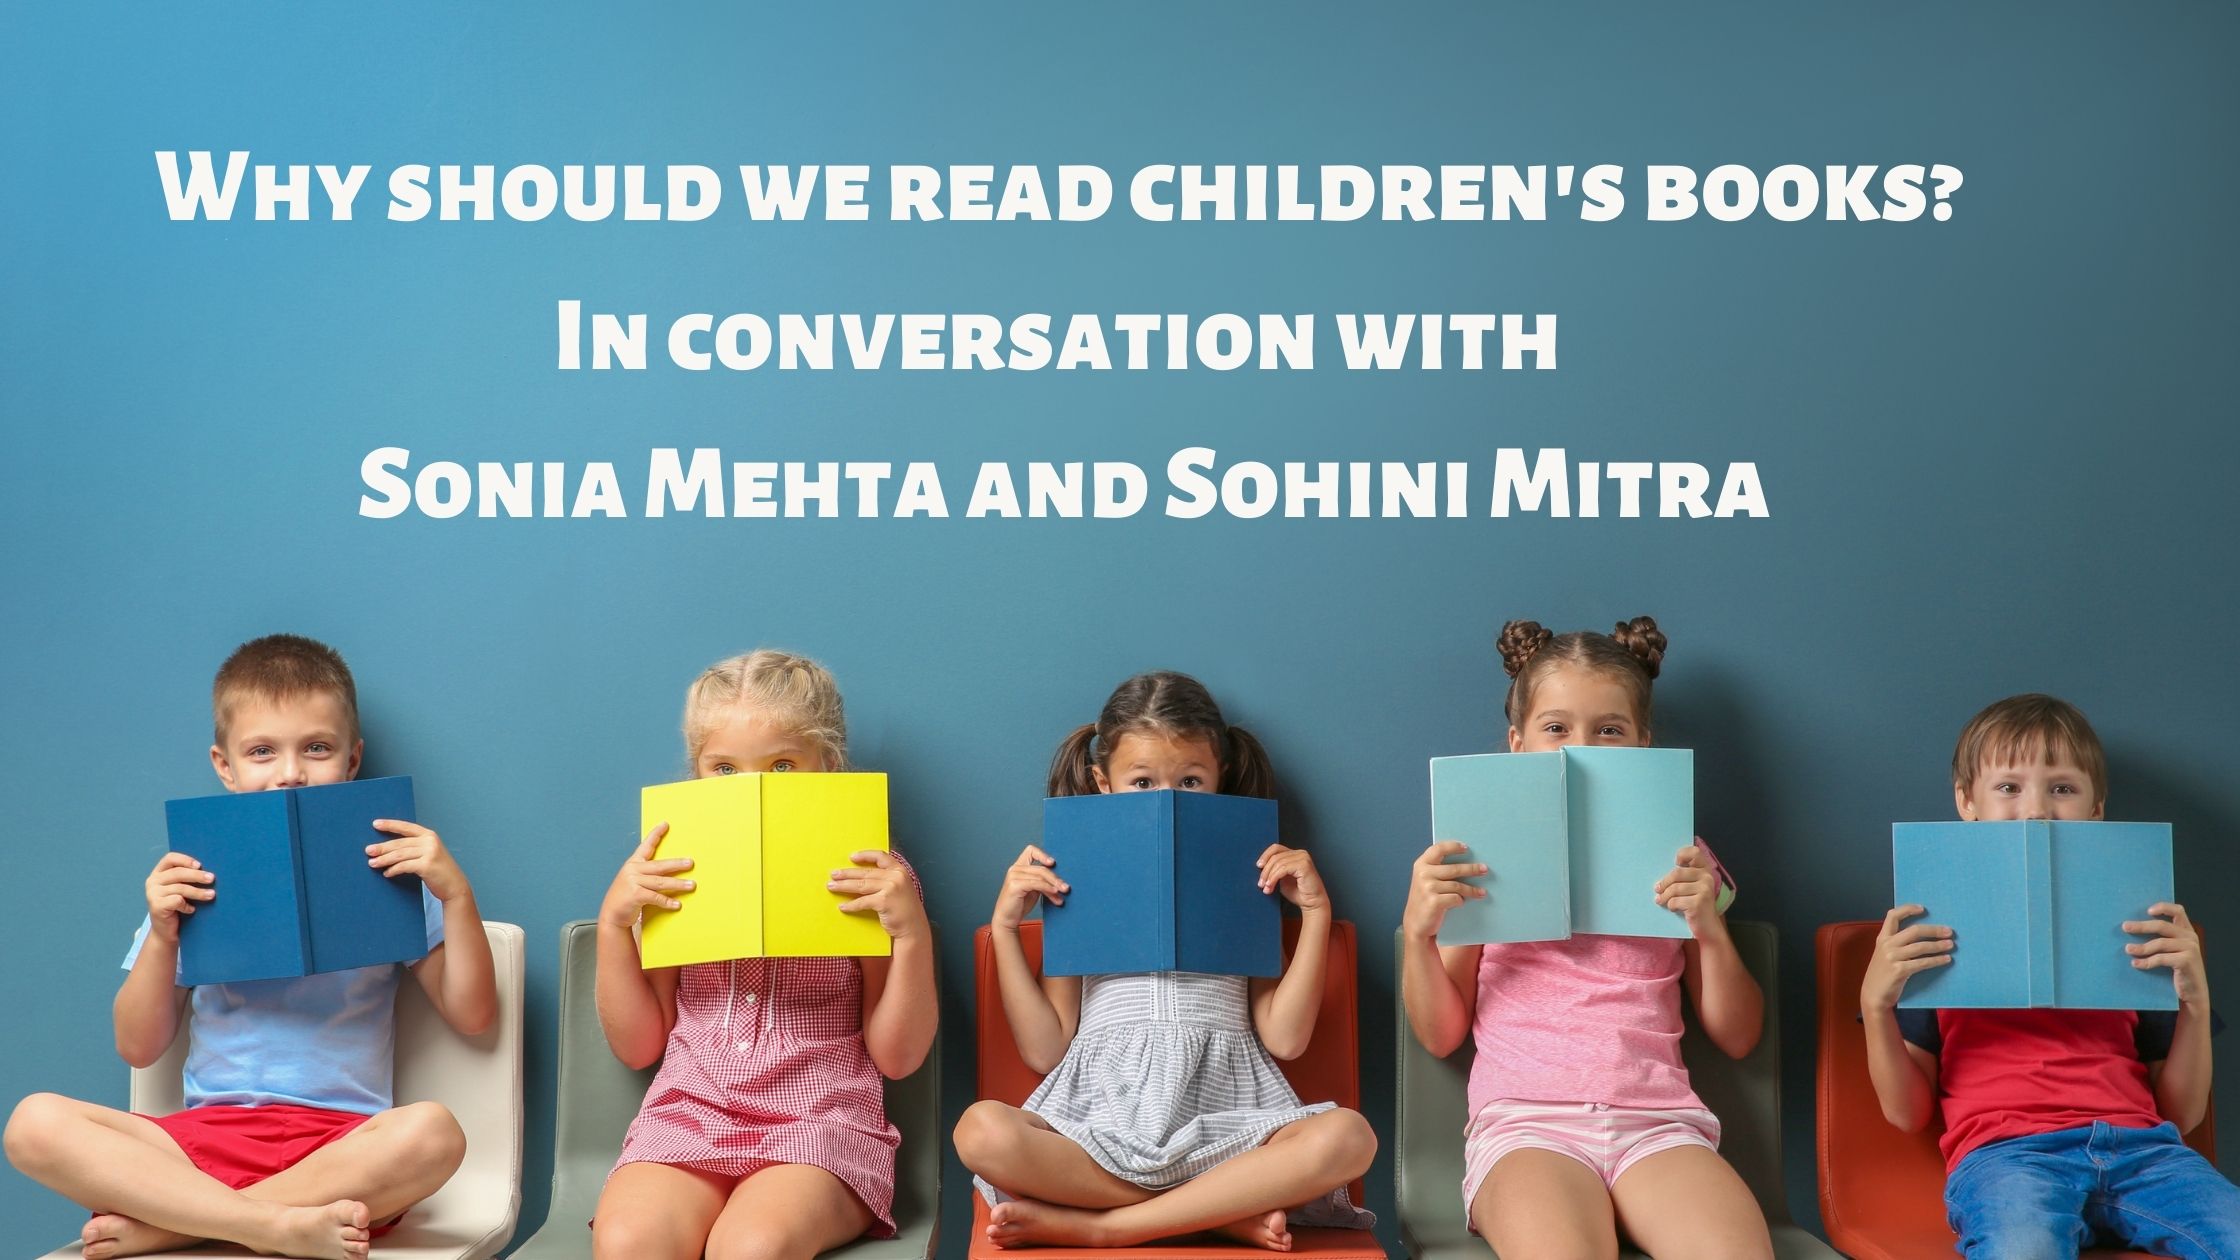 Why should we read children’s books? In conversation with Sonia Mehta and Sohini Mitra